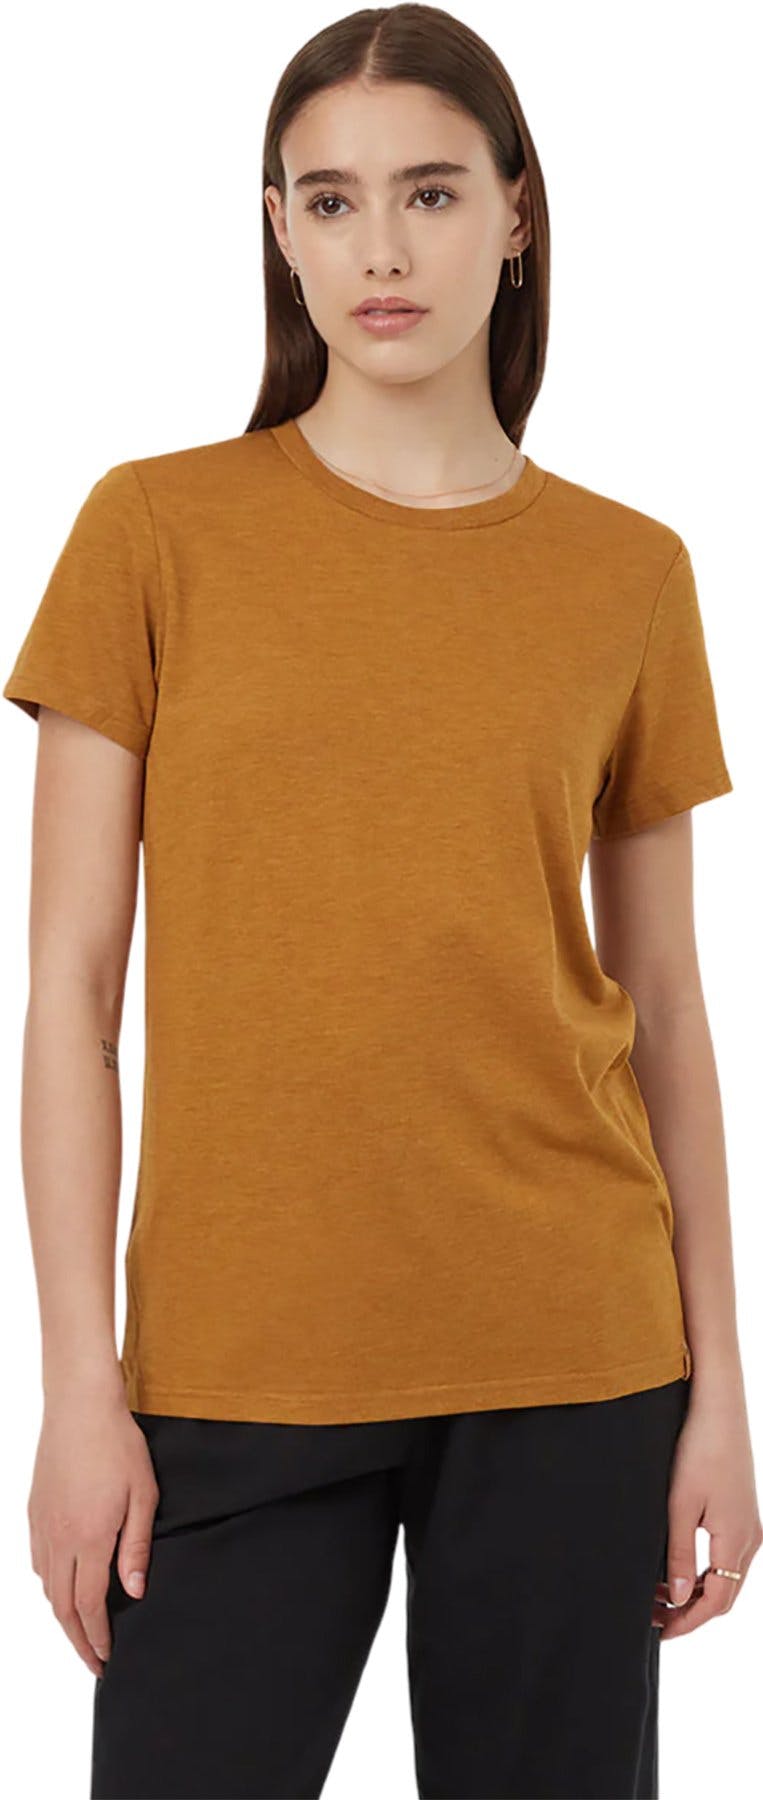 Product image for TreeBlend Classic T-Shirt - Women's